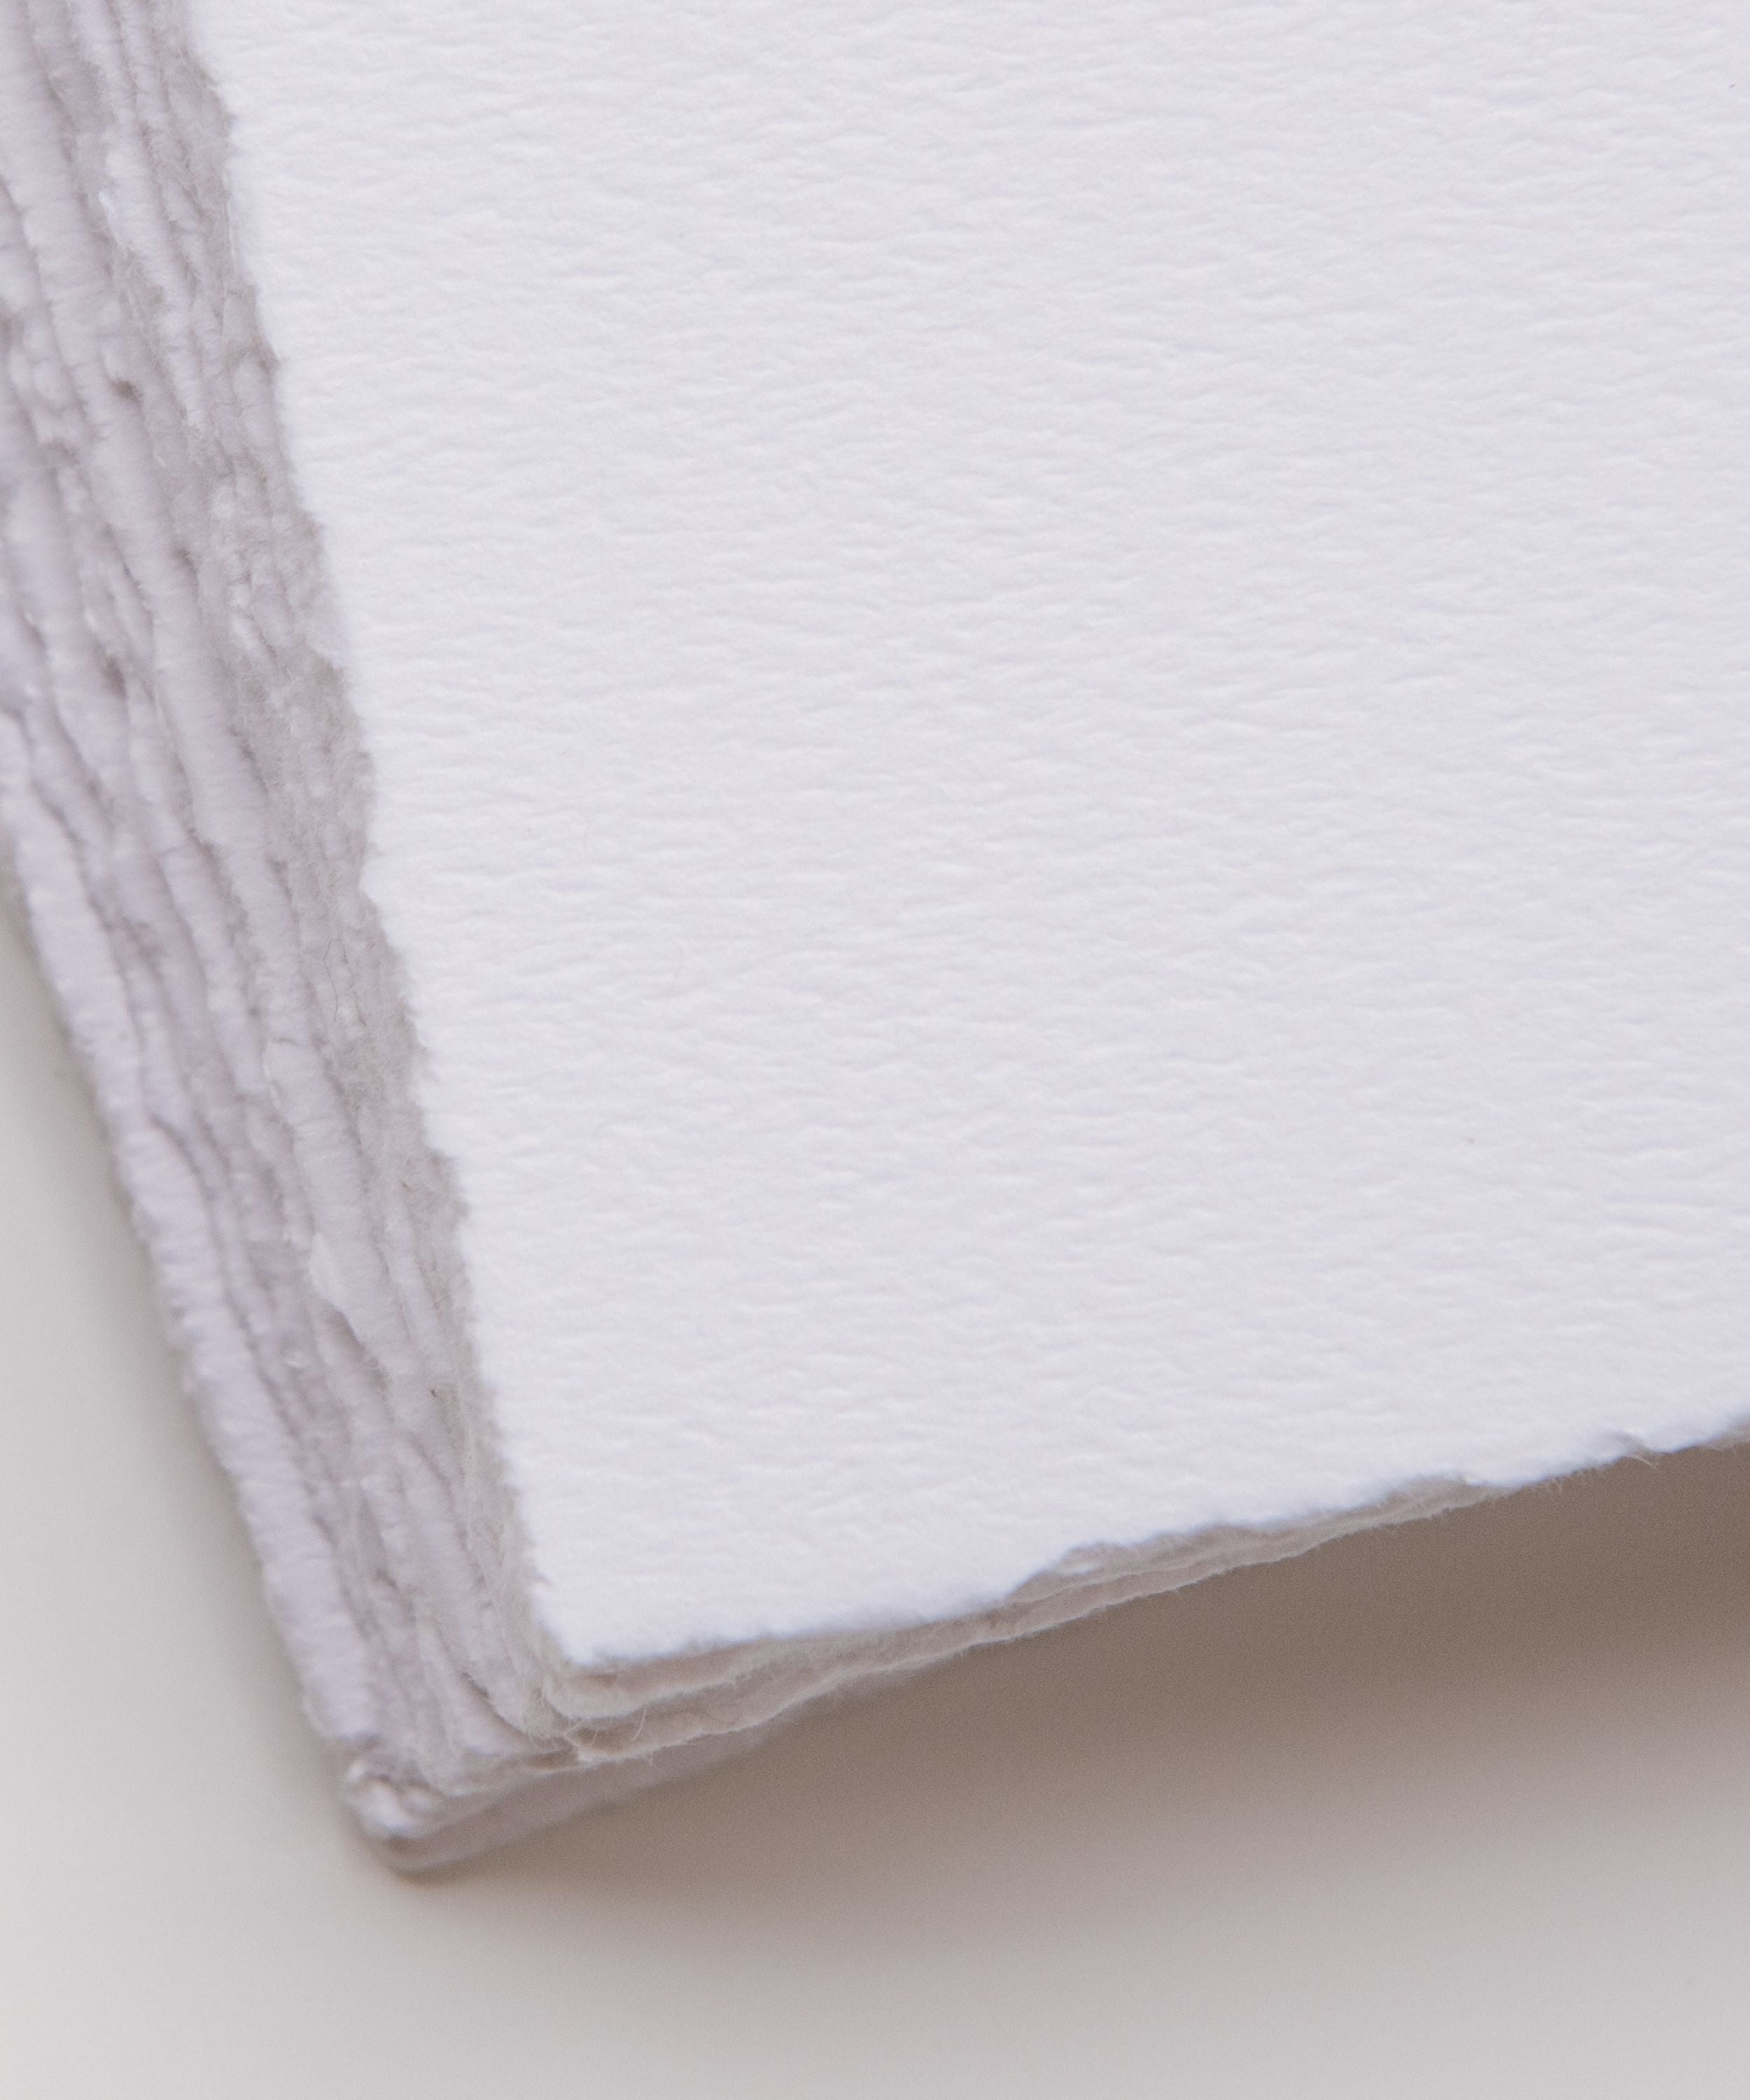 What is Deckle Edge Paper?